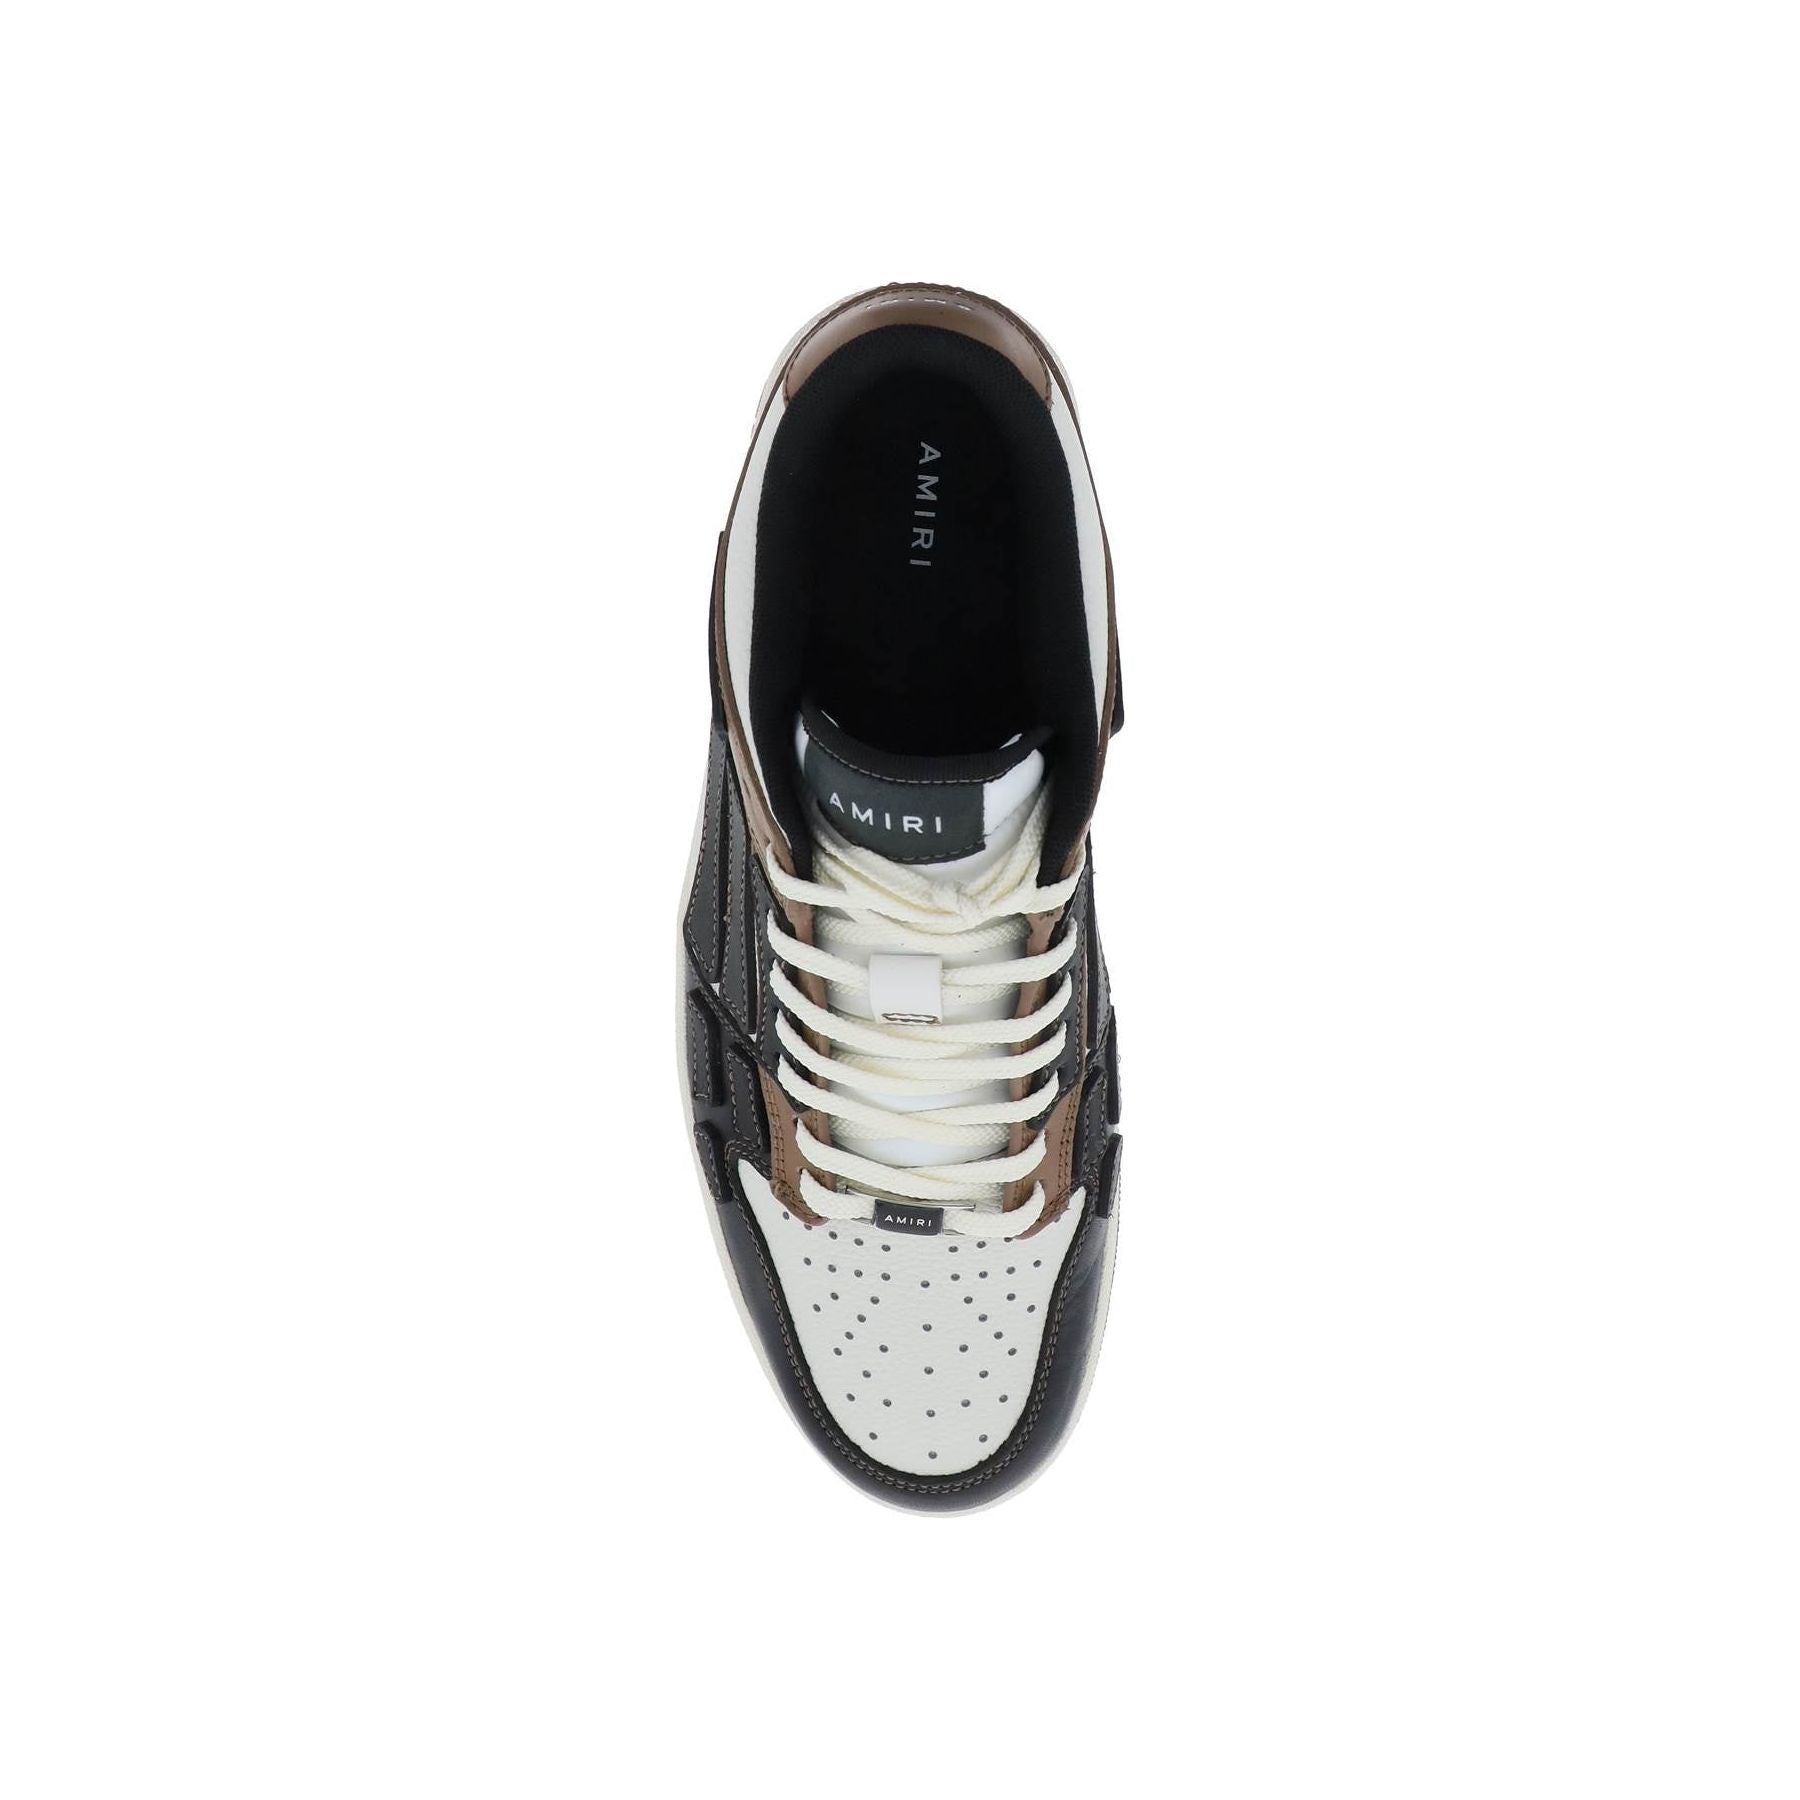 Skel Leather and Mesh Top Low Sneakers